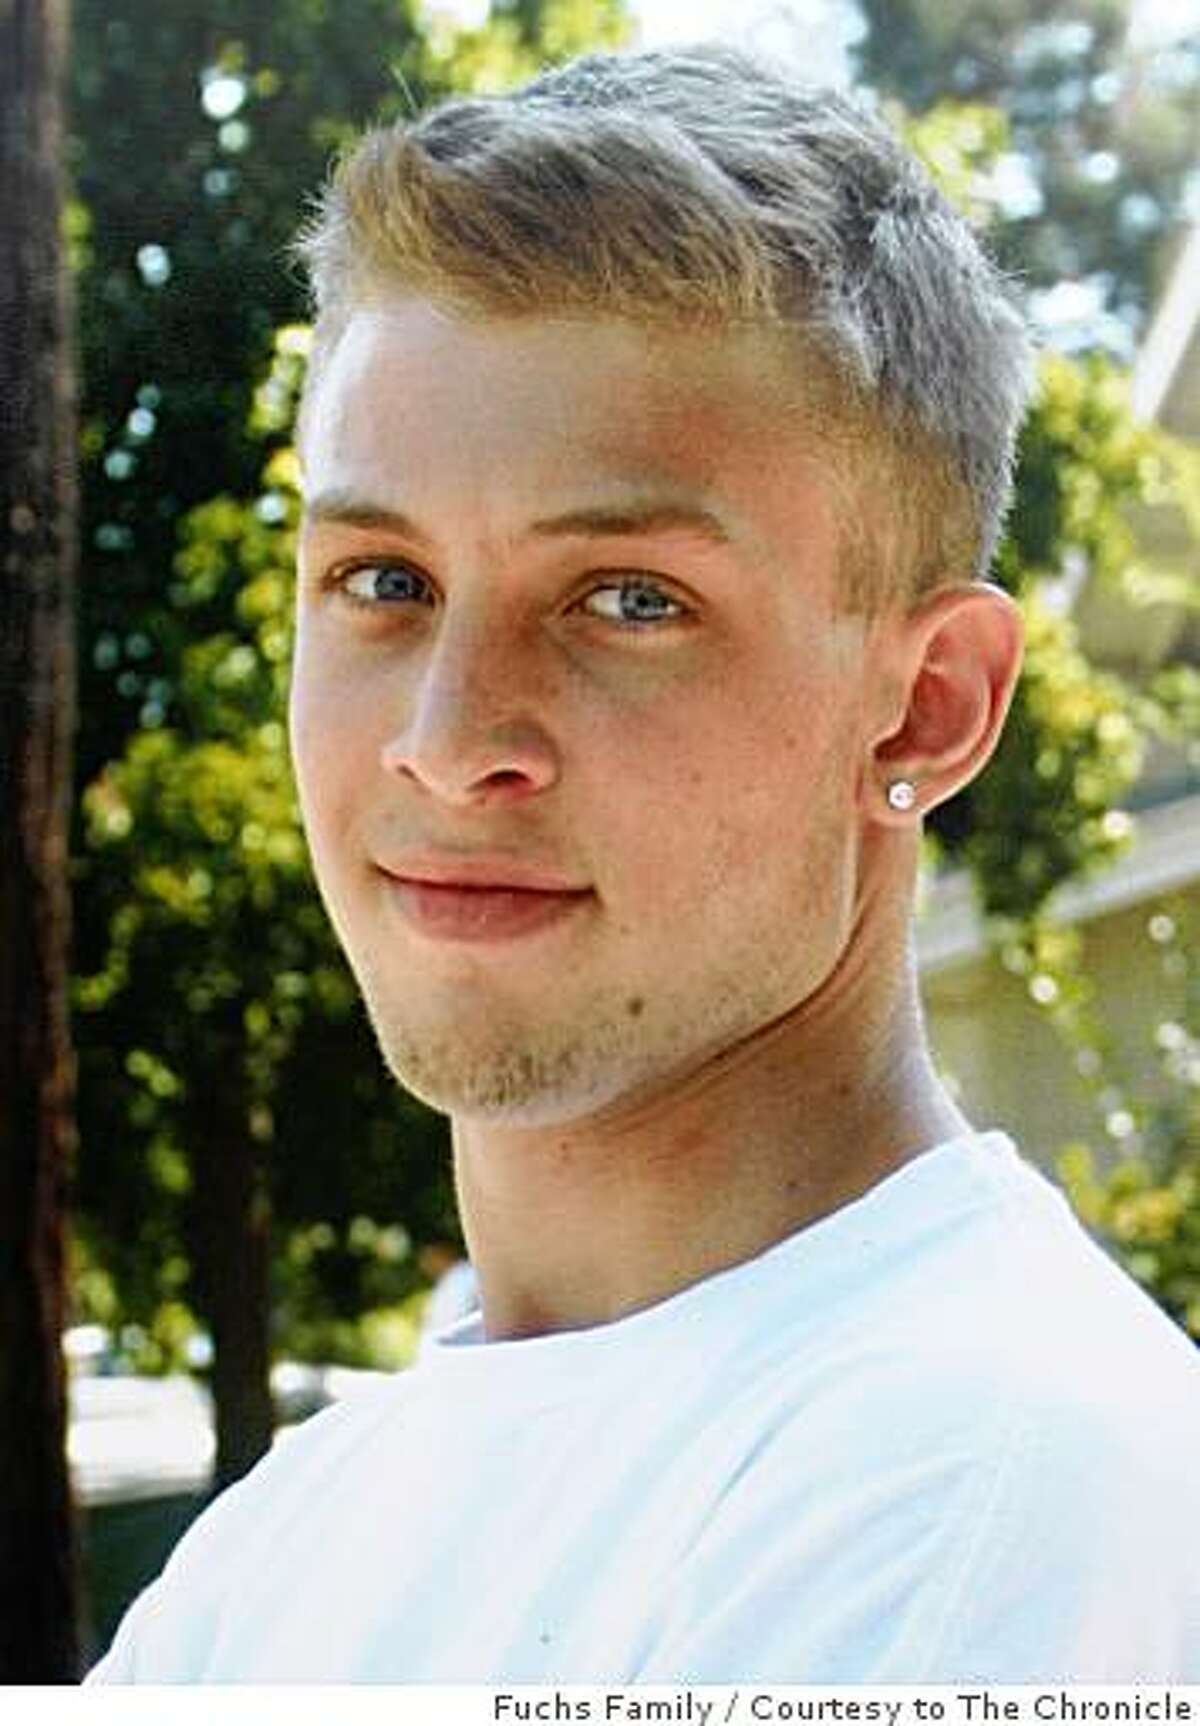 17-year old Rylan Fuchs who was shot and killed last night, Danville,Ca. Police are investigating the murder.